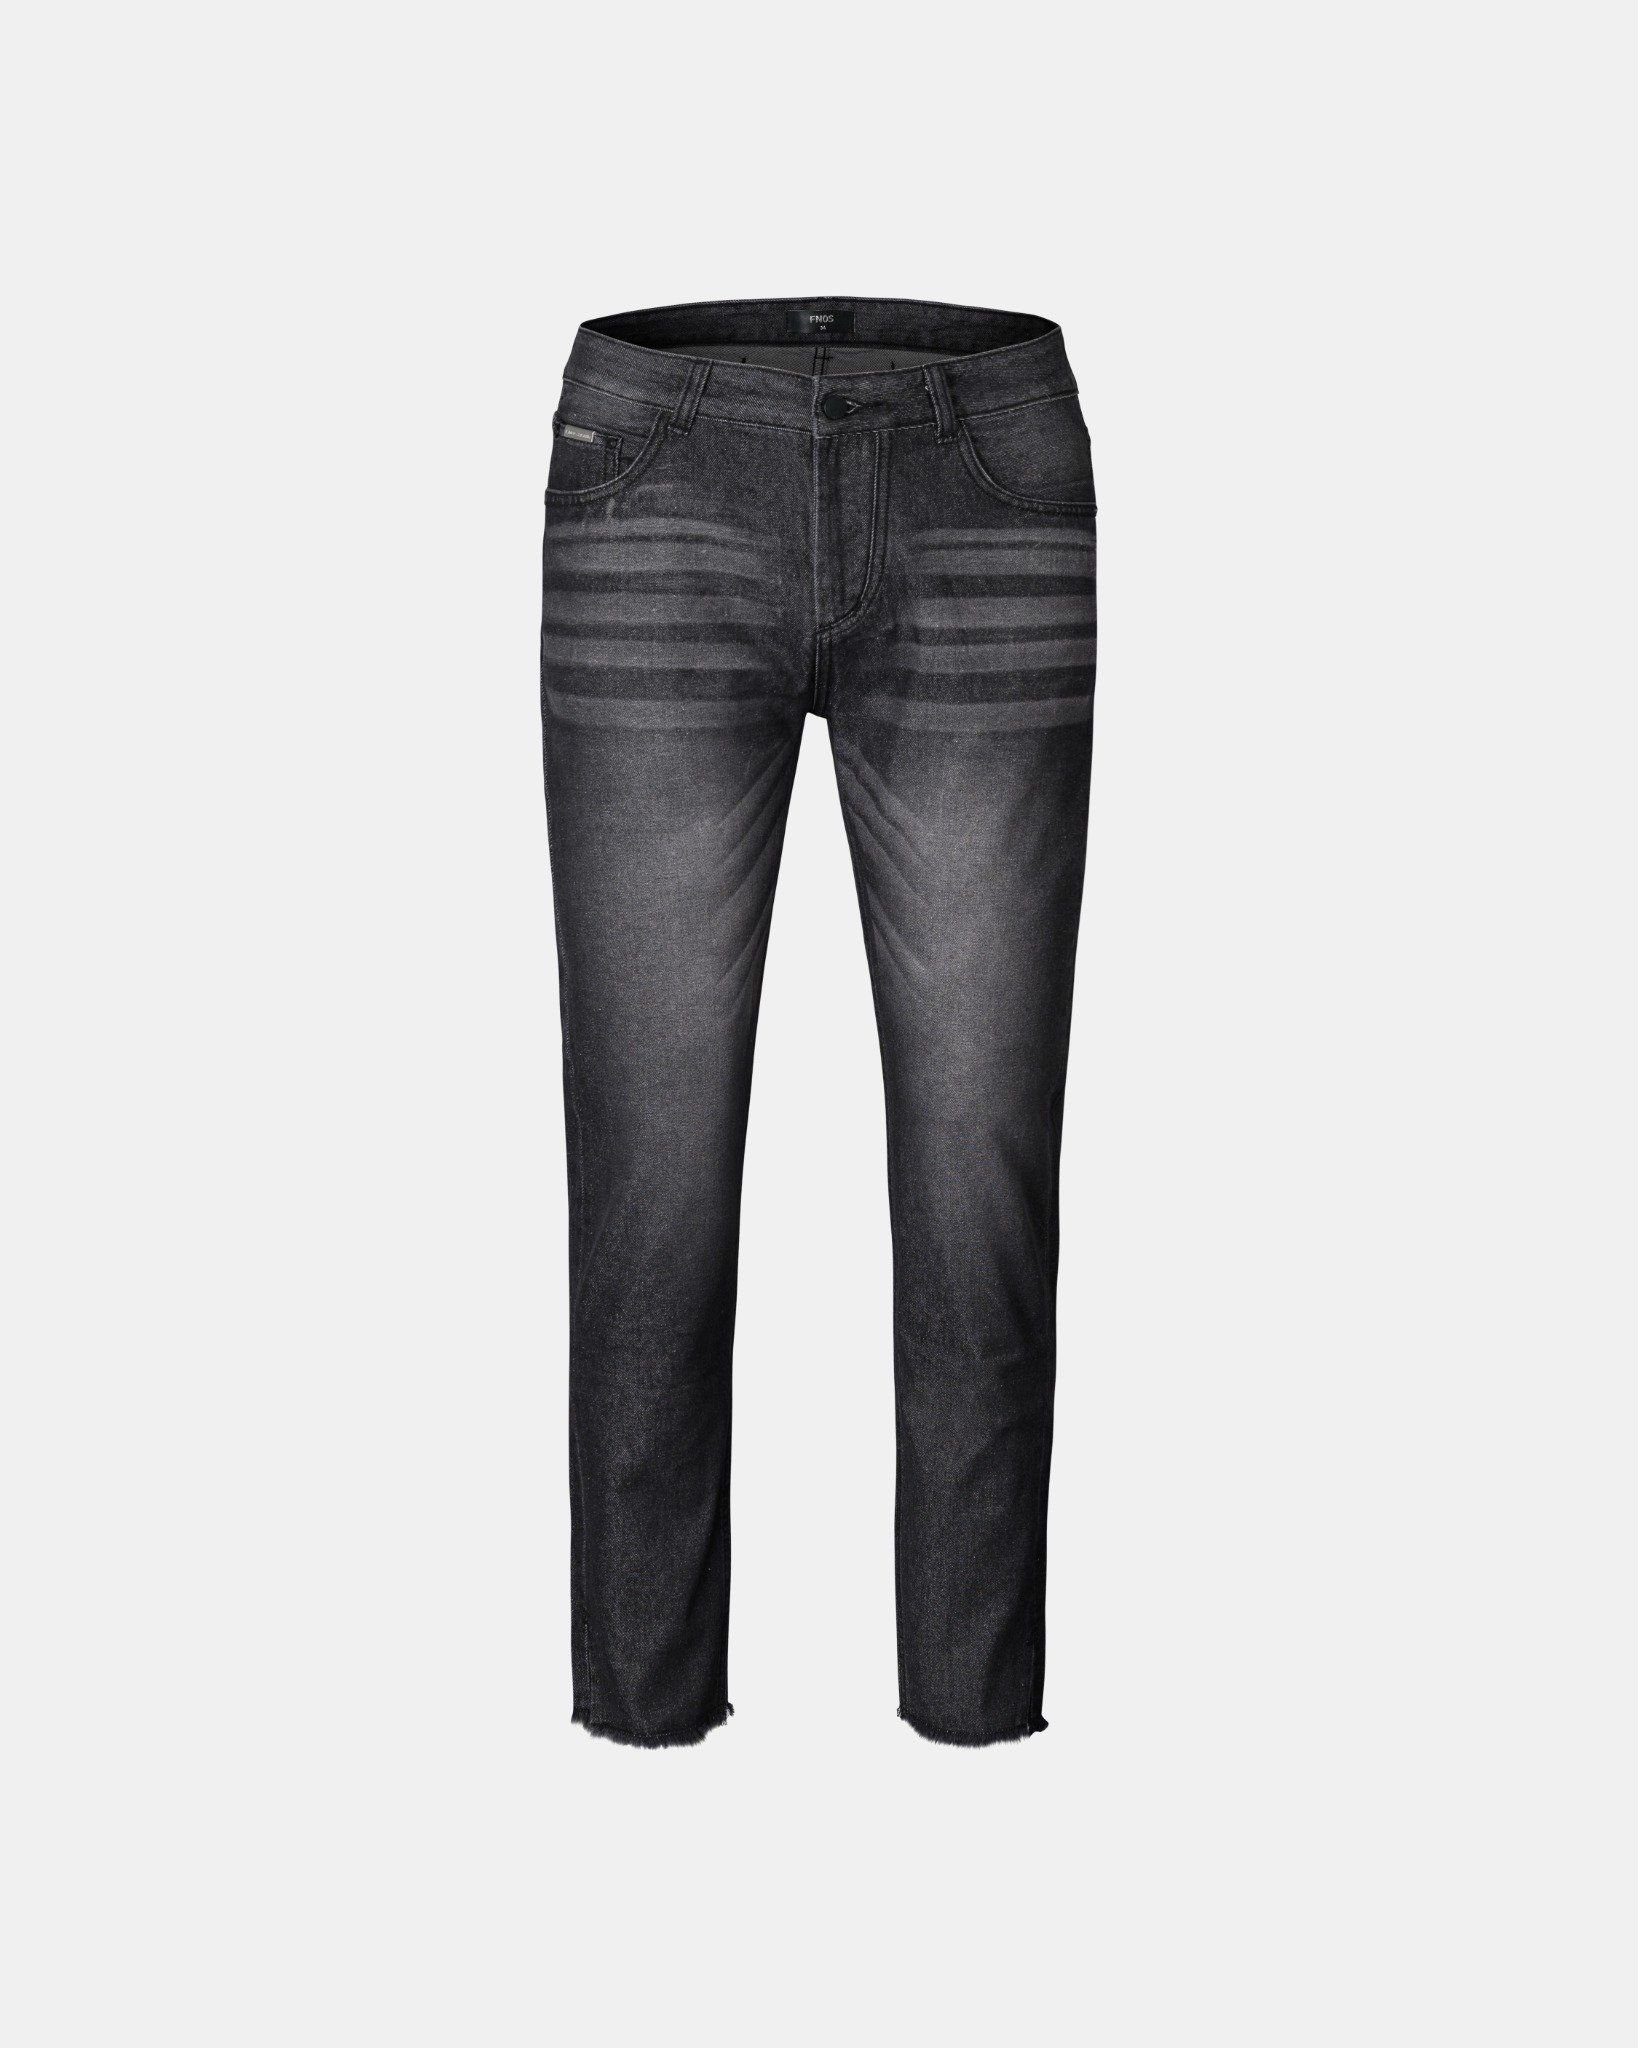  RL5 - RELAXED JEANS WITH SPLIT HEMS - ASH GREY 